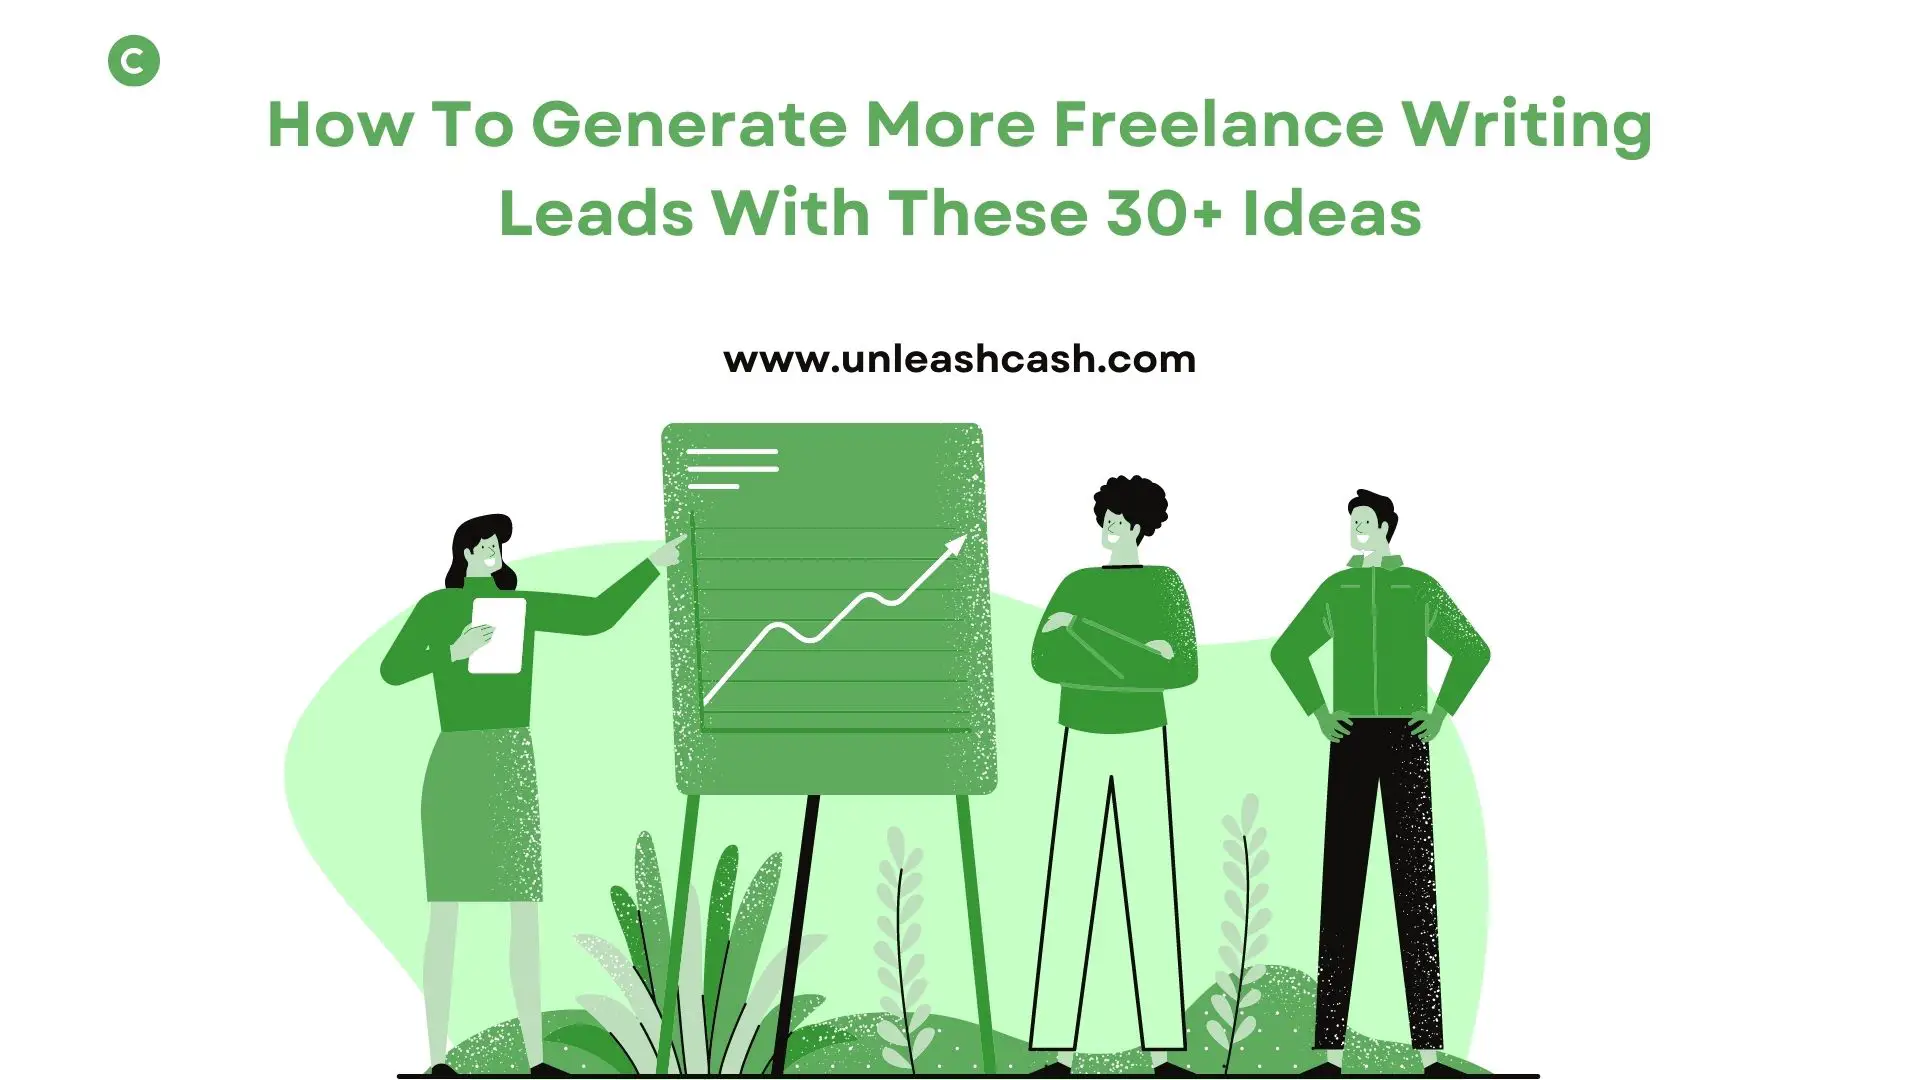 How To Generate More Freelance Writing Leads With These 30+ Ideas